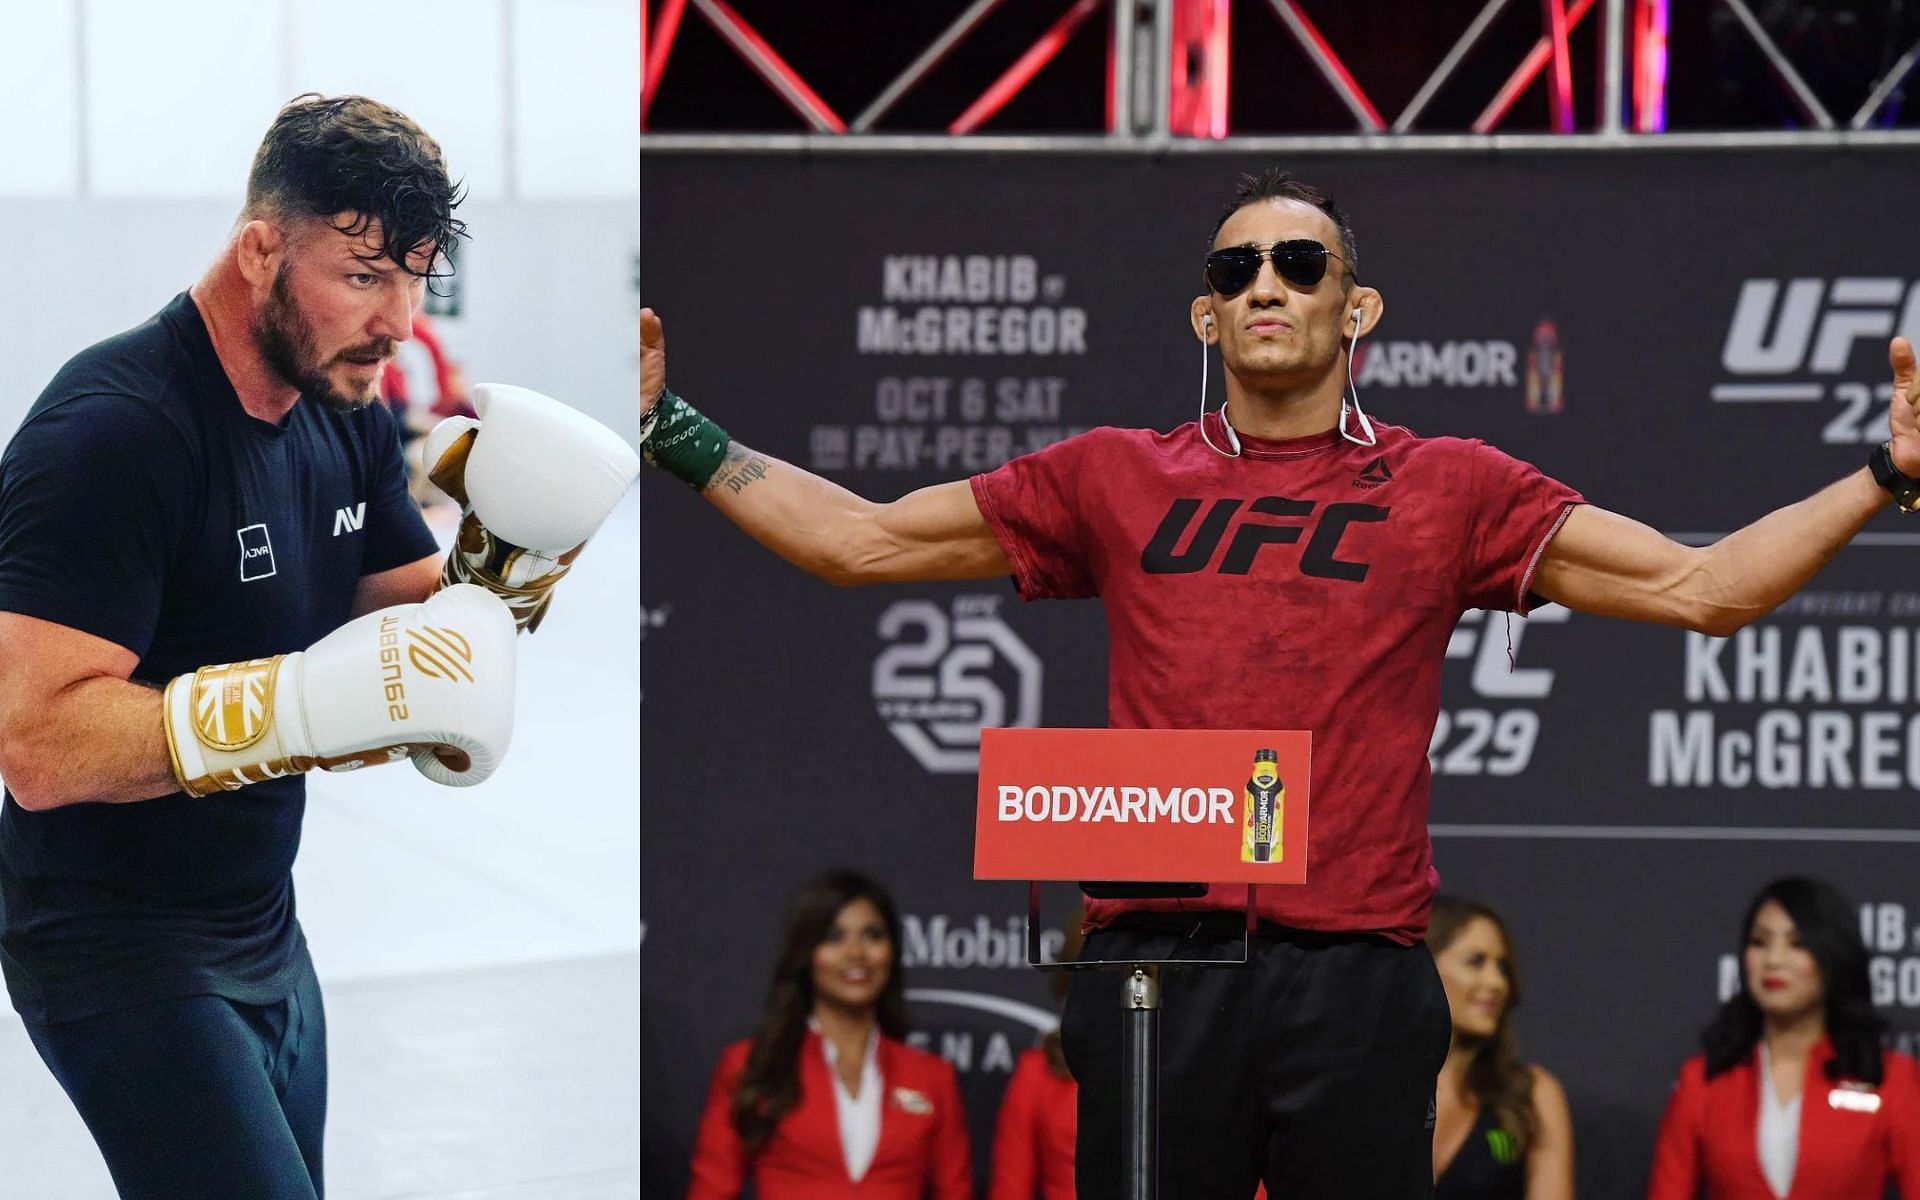 Michael Bisping (left) and Tony Ferguson (right). (Images courtesy of @mikebisping Instagram and Getty)